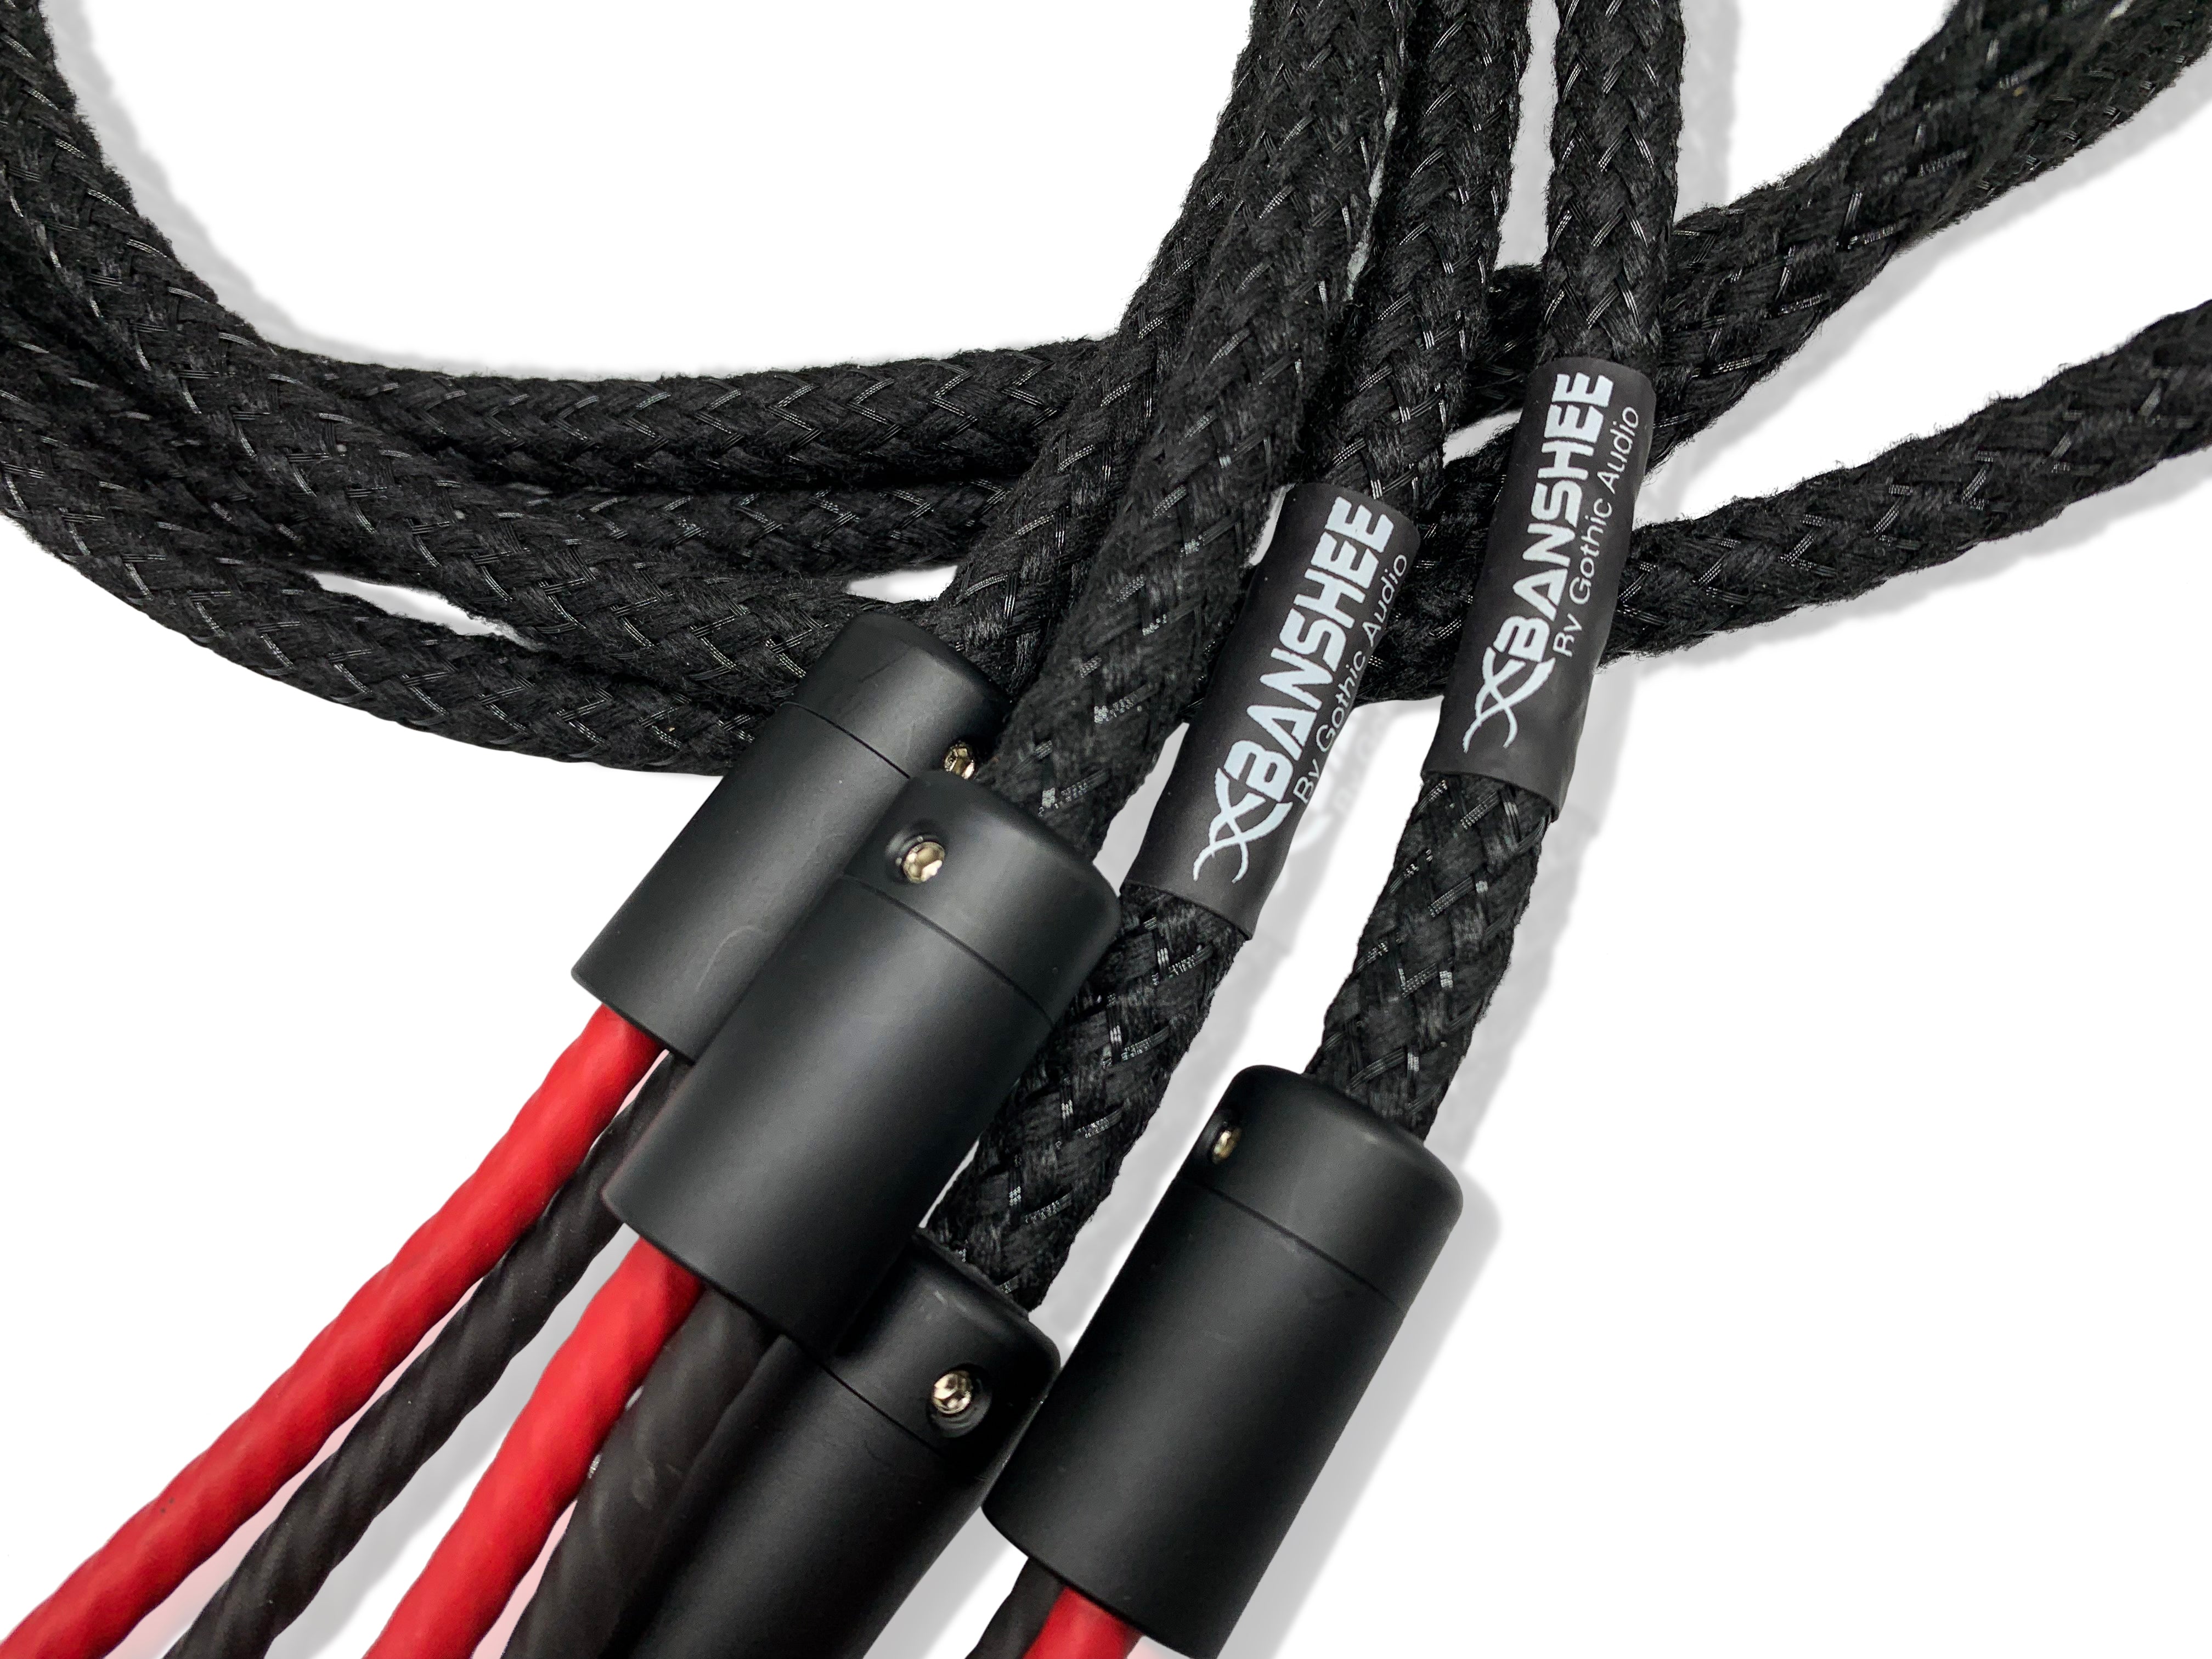 Banshee OCC 5N Pure Silver Speaker Cables